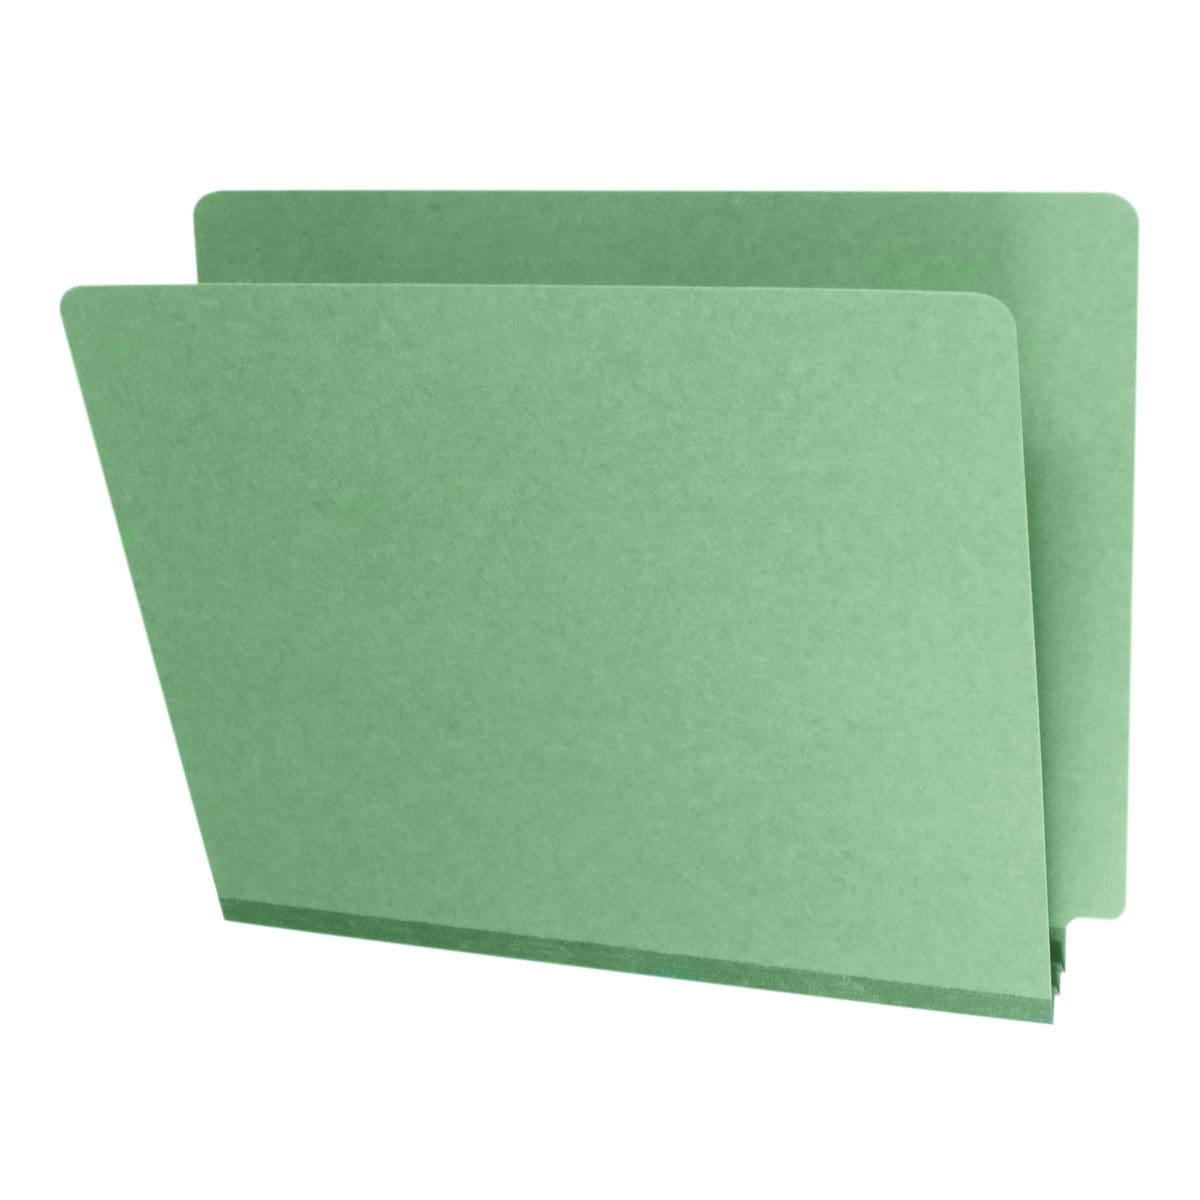 Green Letter Size End Tab Classification Folder with 2